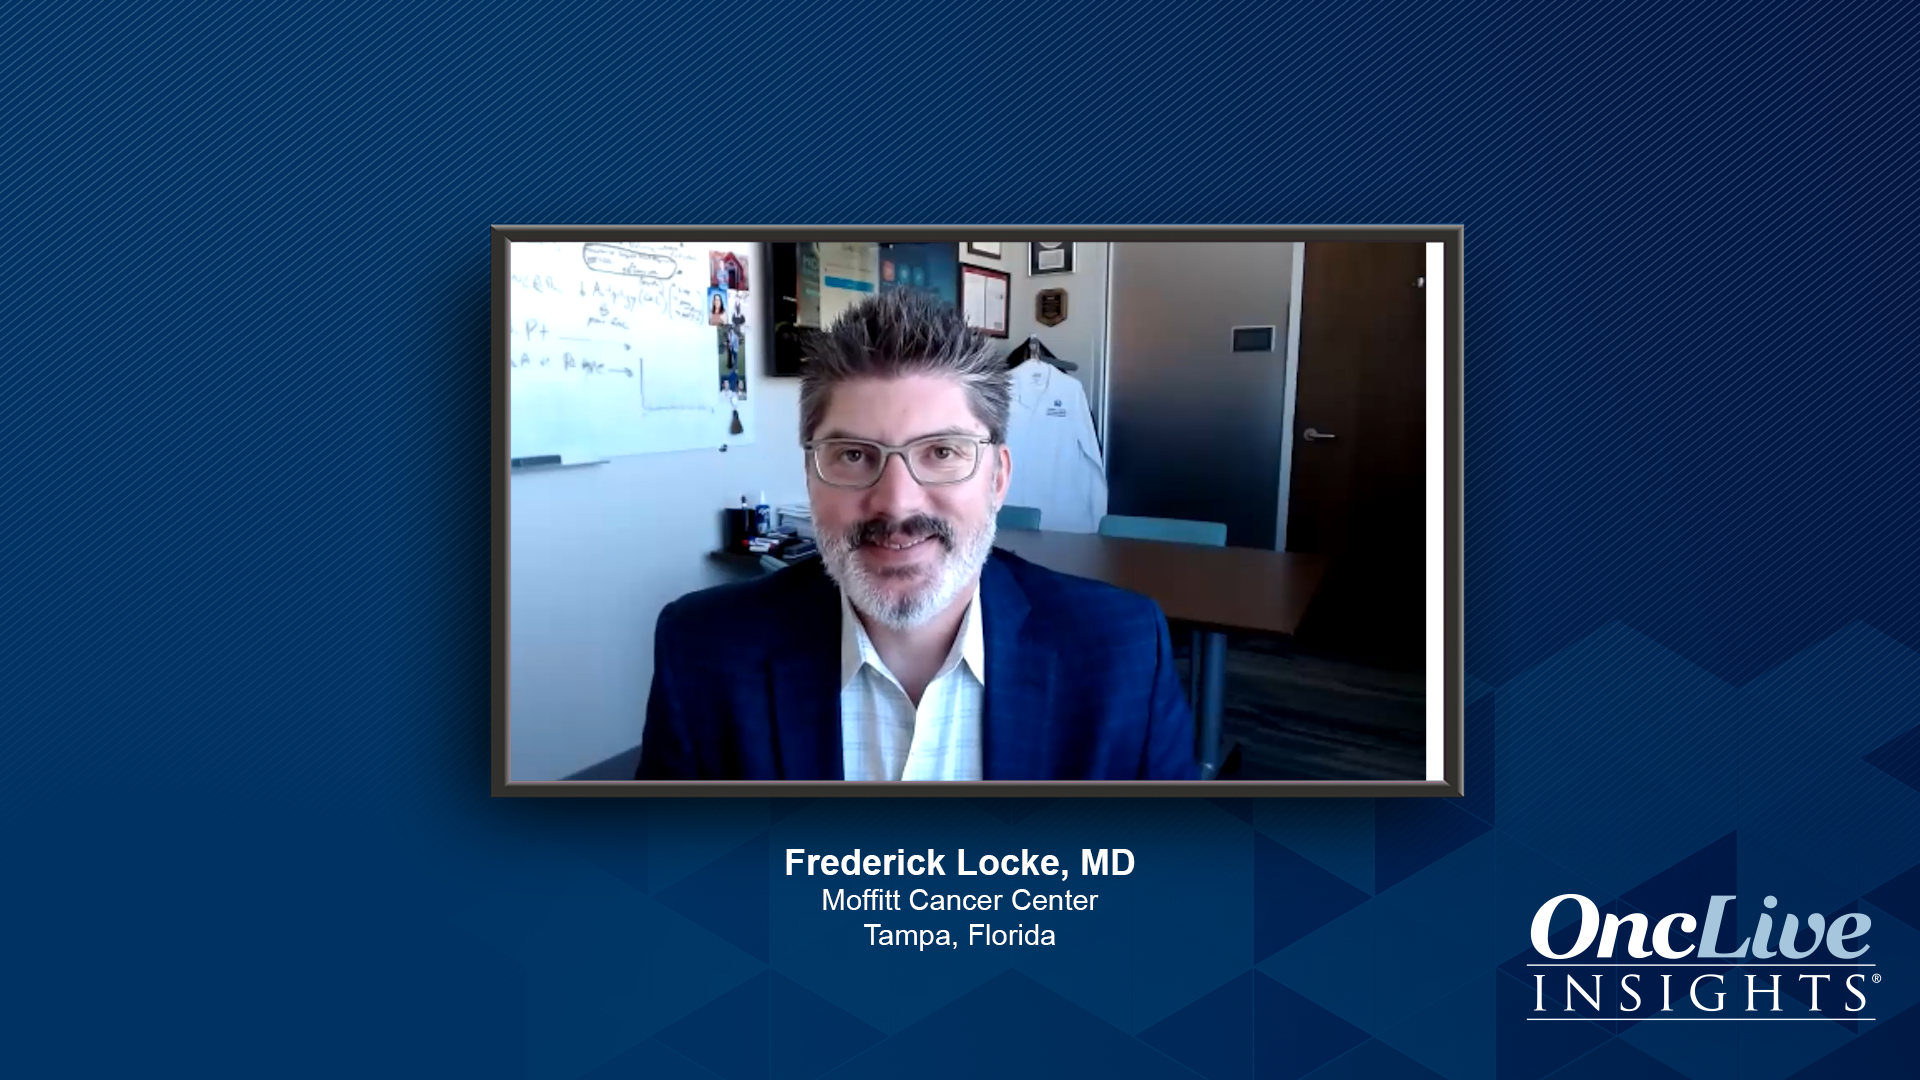 ZUMA-1: Axi-Cel in Relapsed/Refractory LBCL